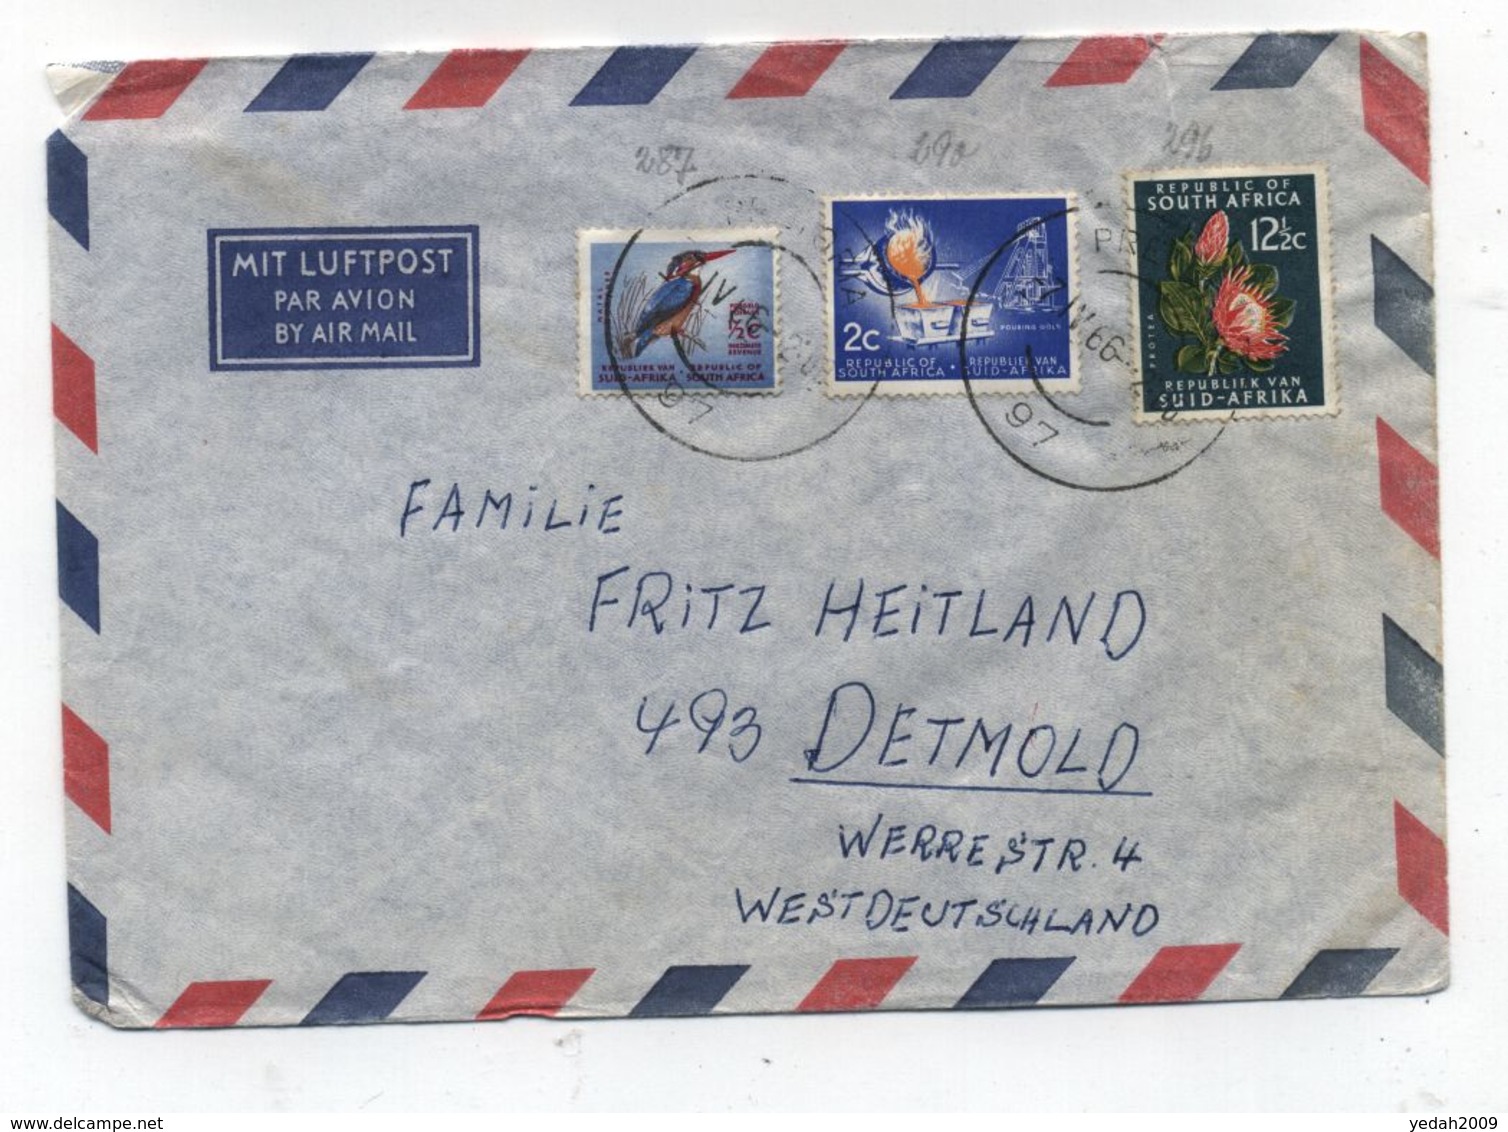 South Africa AIRMAIL COVER TO Germany 1966 - Luchtpost